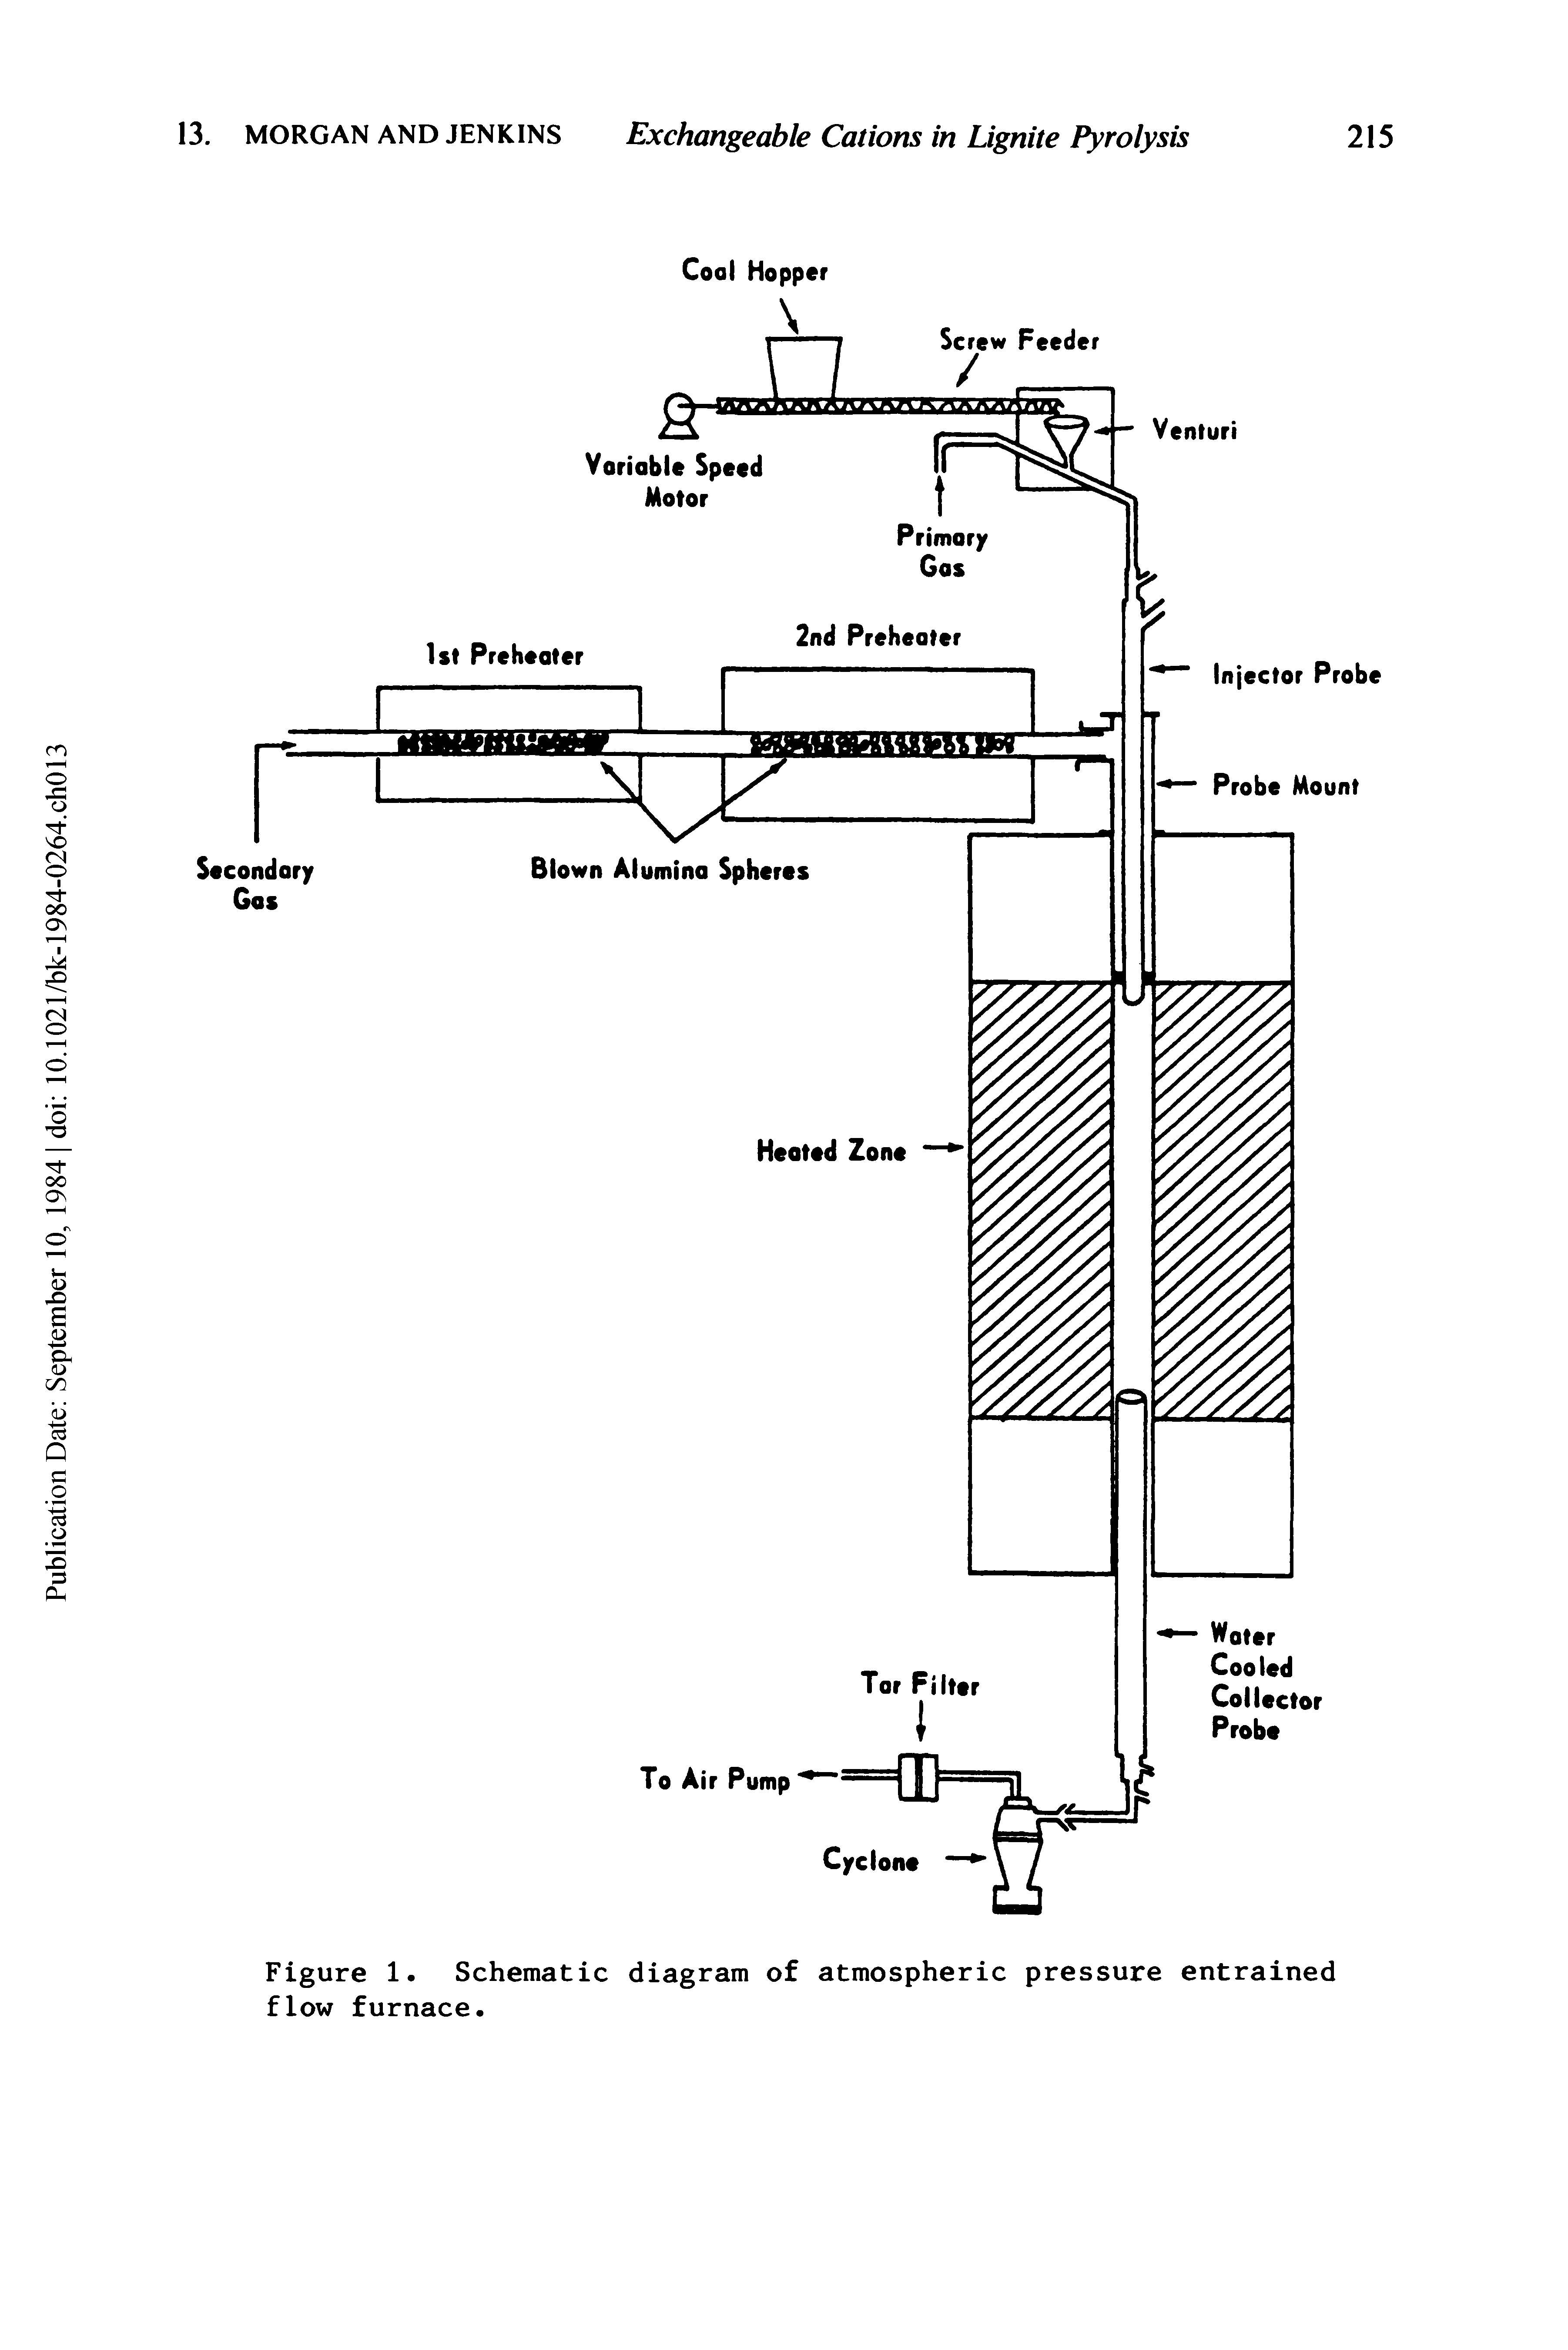 Figure 1. Schematic diagram of atmospheric pressure entrained flow furnace.